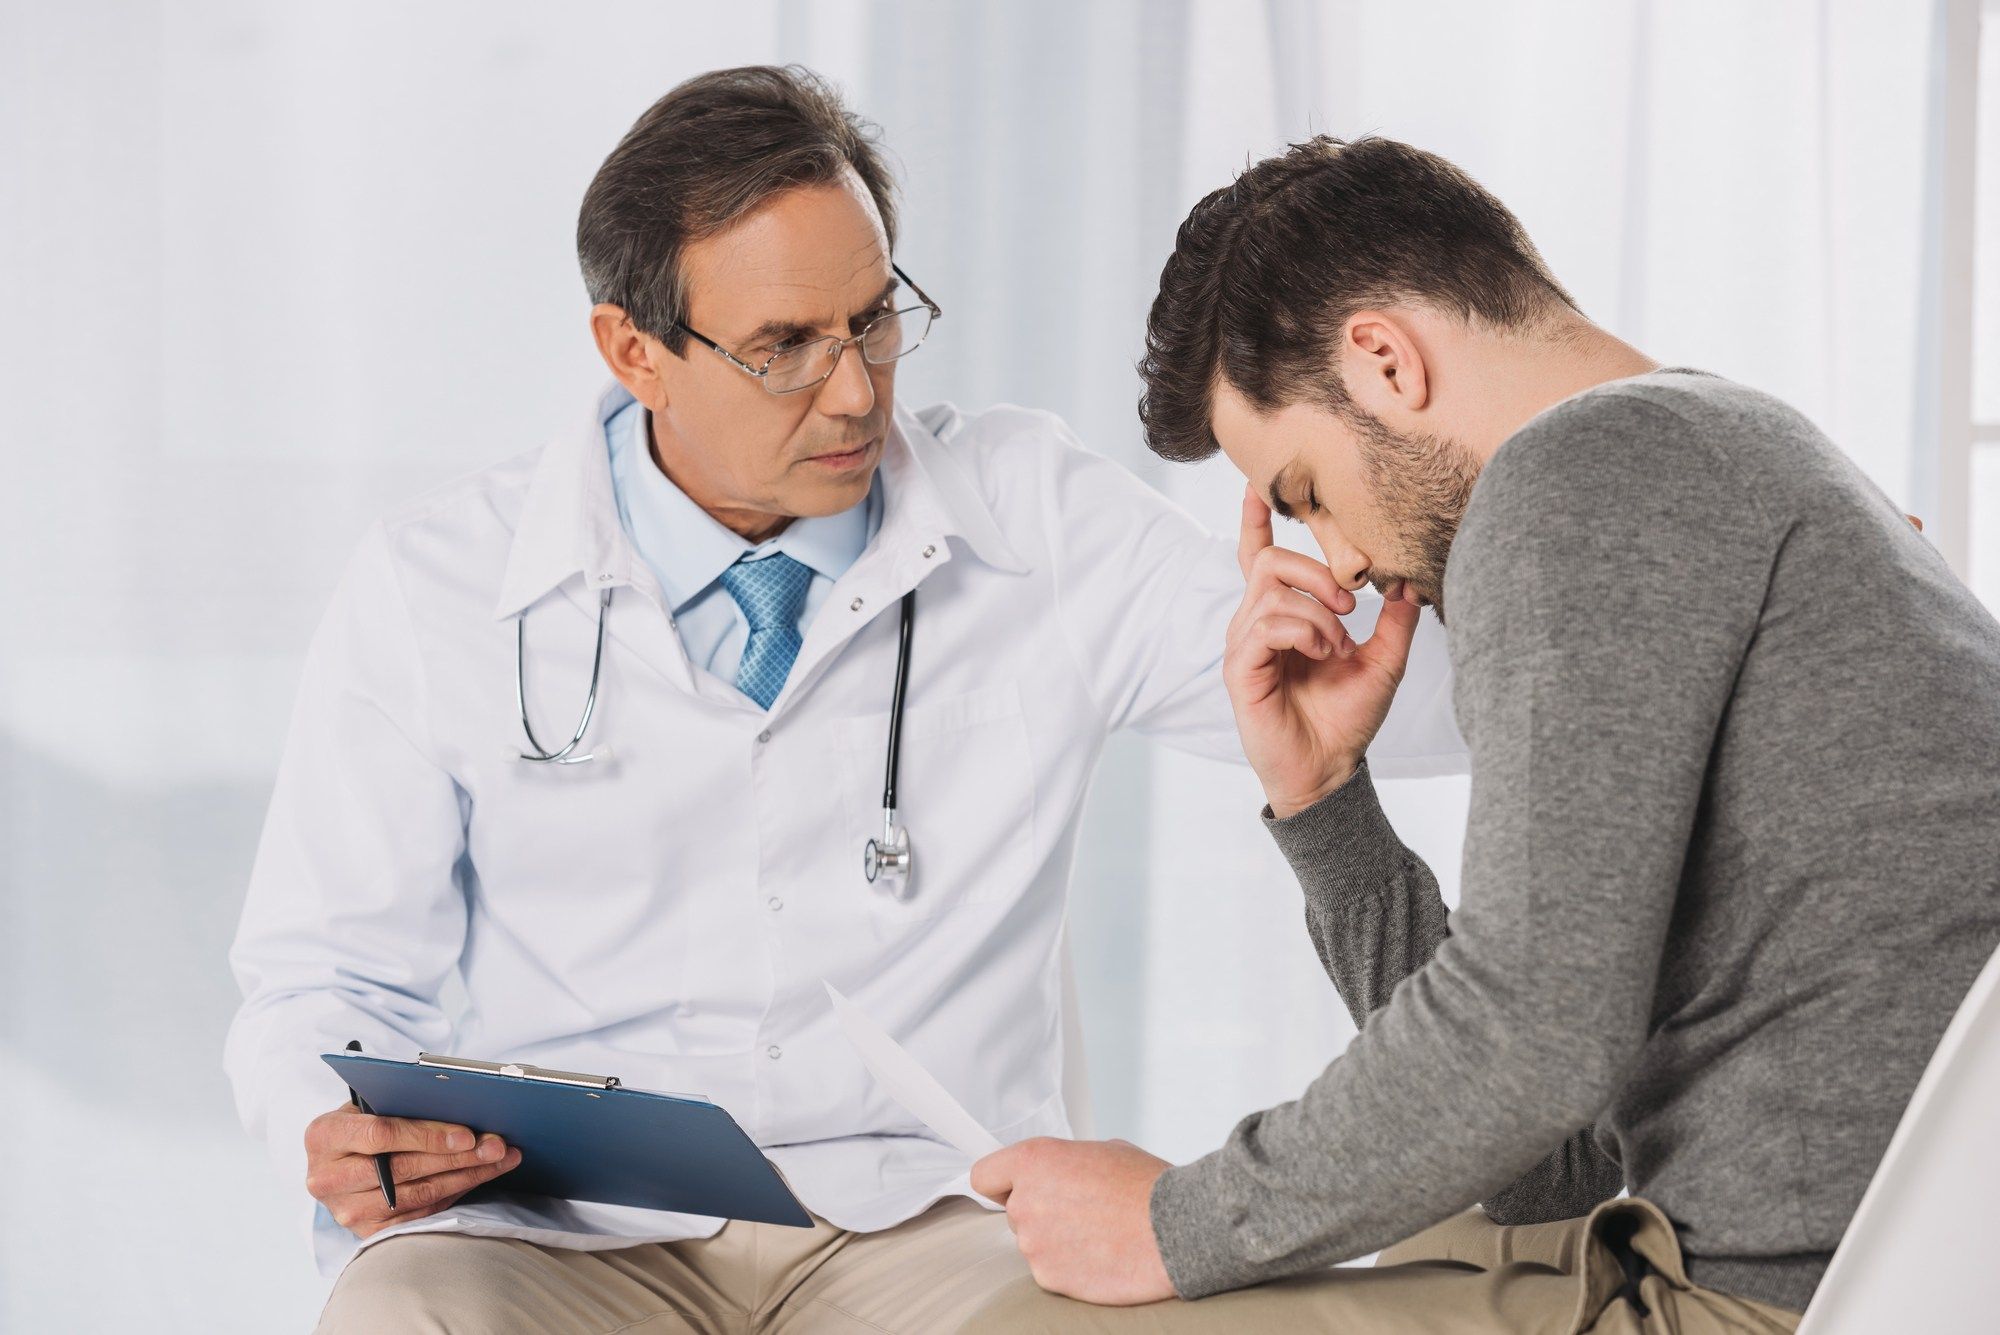 Male doctor comforts upset male patient